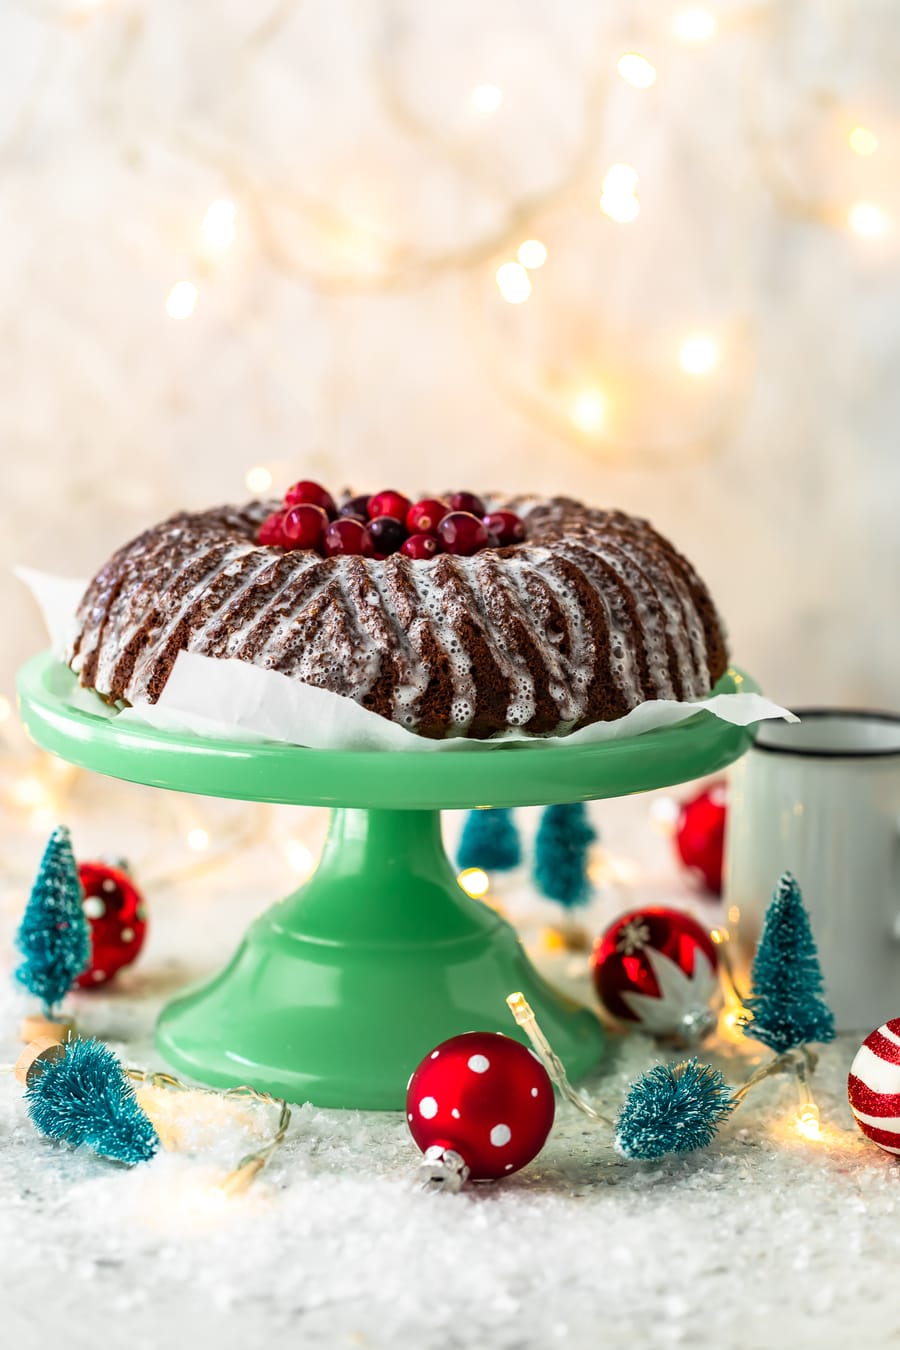 Gingerbread Cake w/ Sugared Winter Forest - Blue Bowl